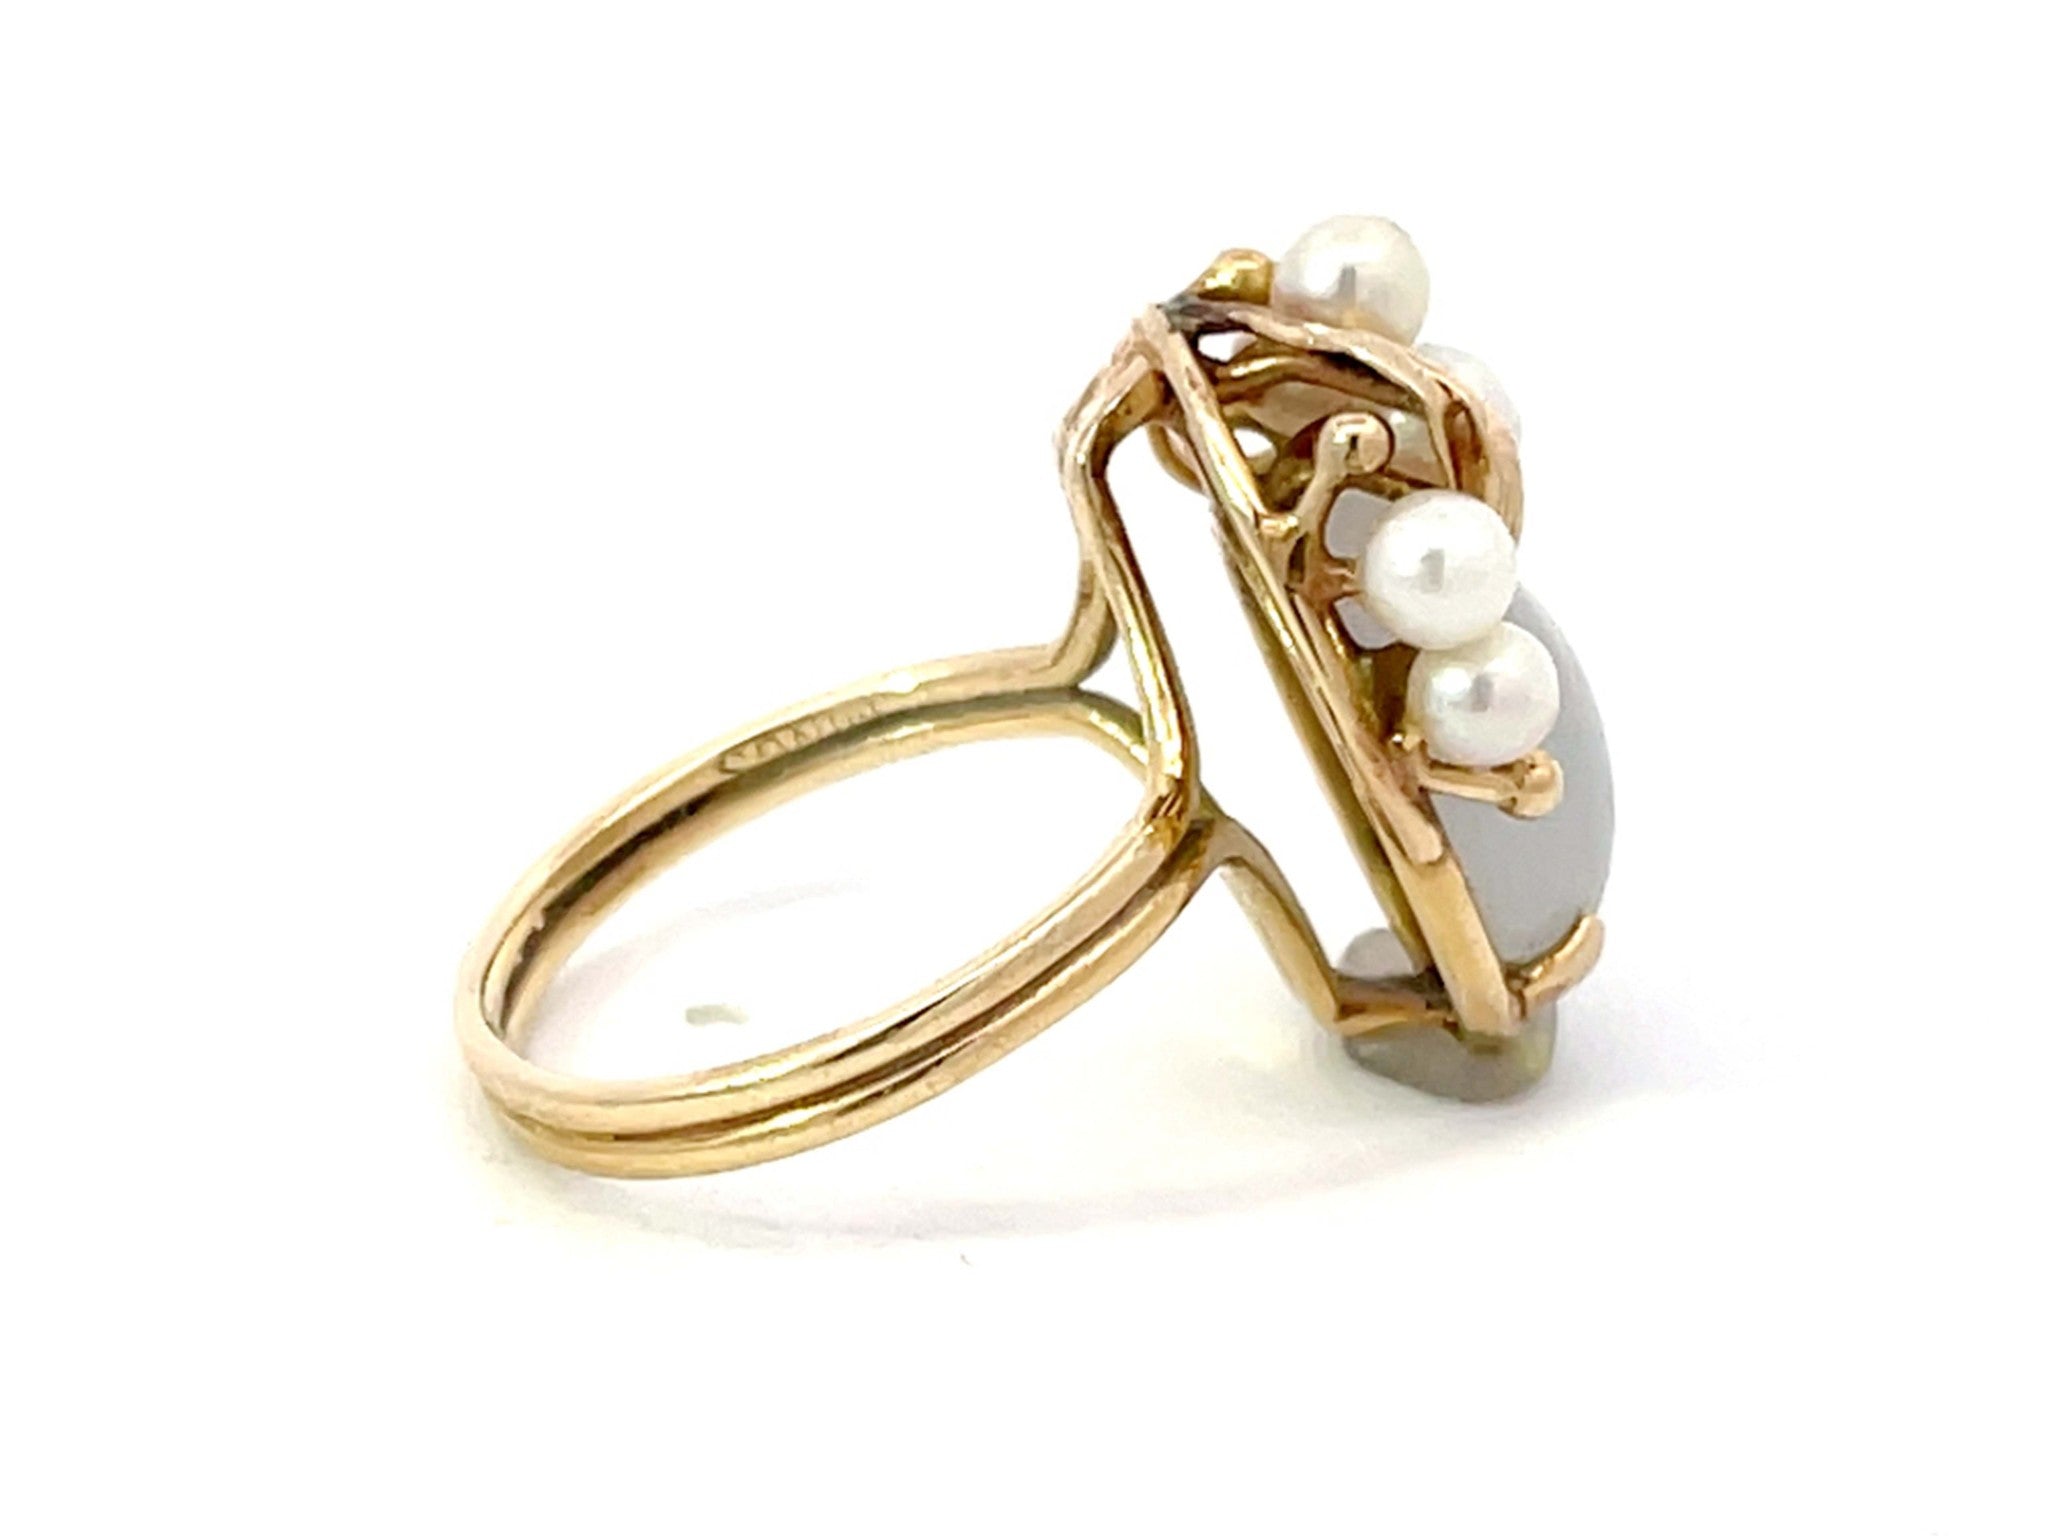 Mings Hawaii Oval Cabochon White Jade Pearl Leaf Ring 14k Yellow Gold